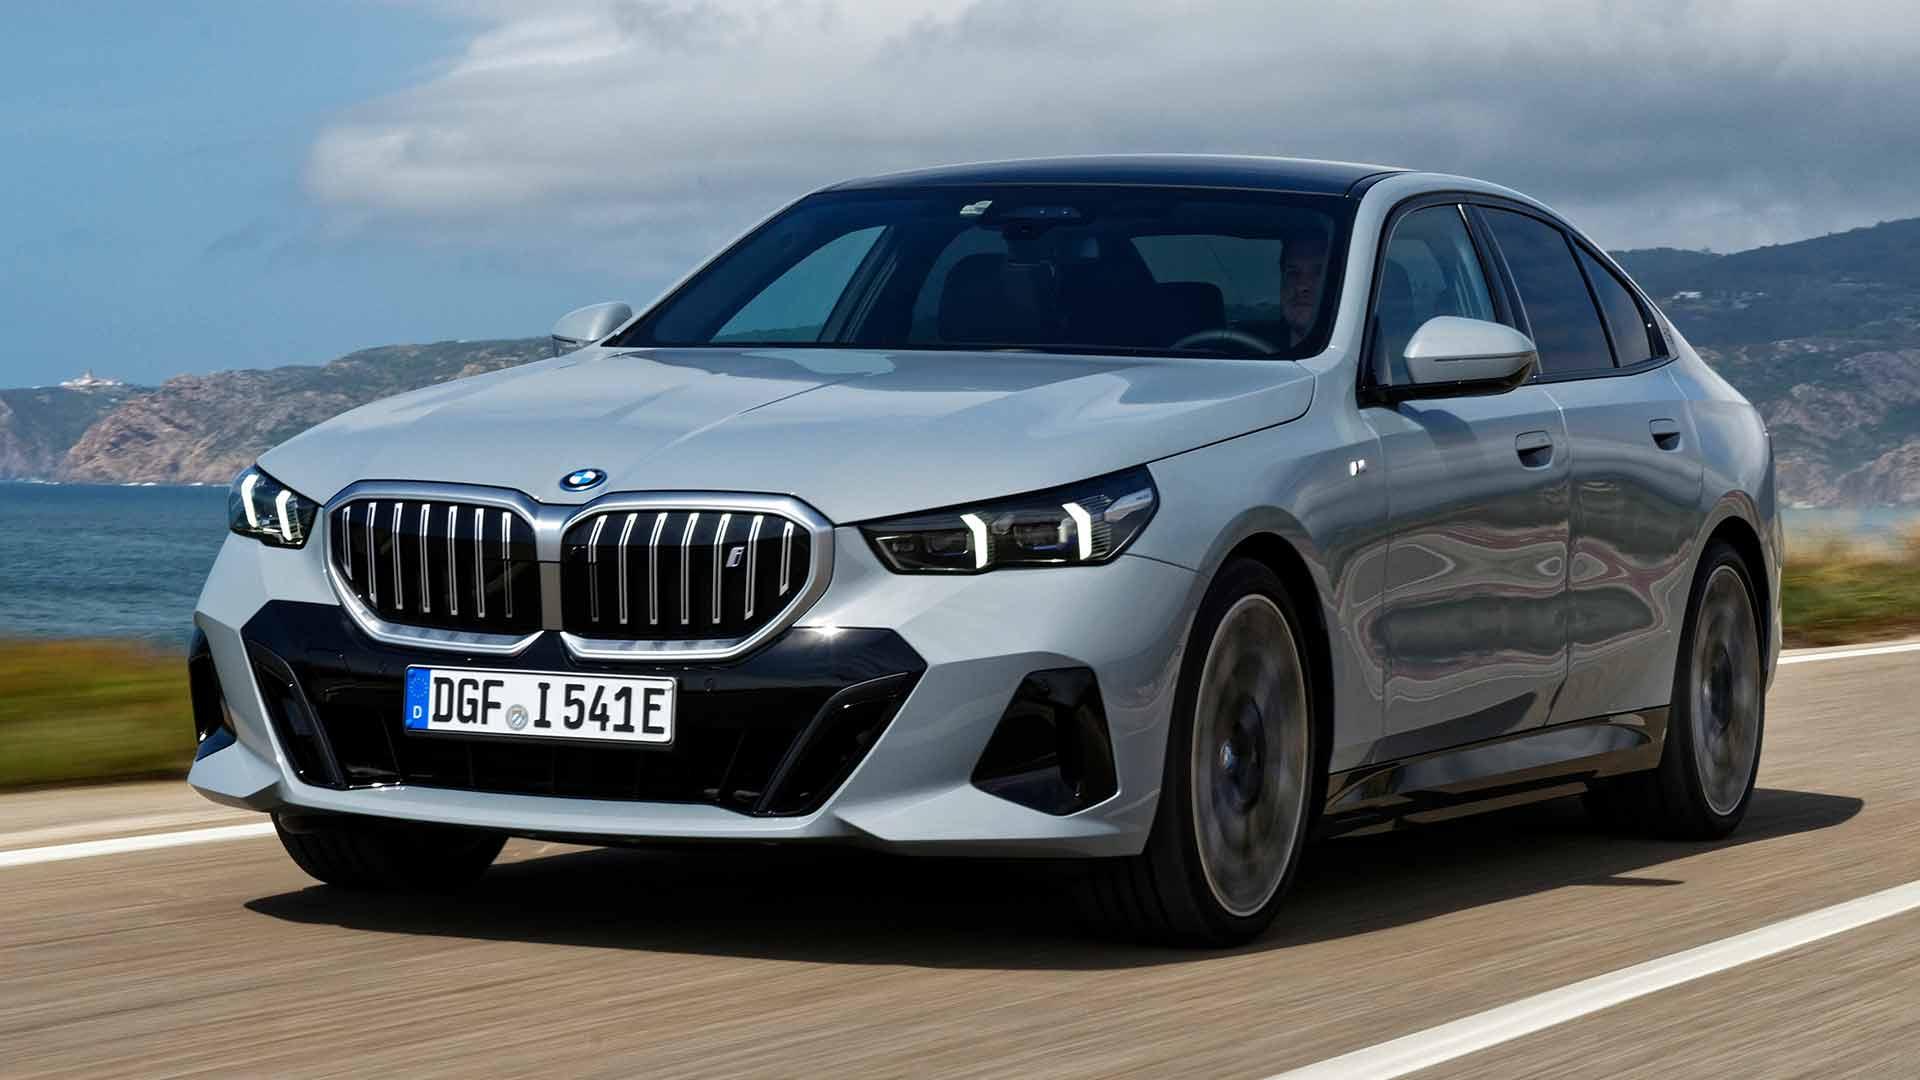 BMW i5 eDrive40 driving diagonally in front